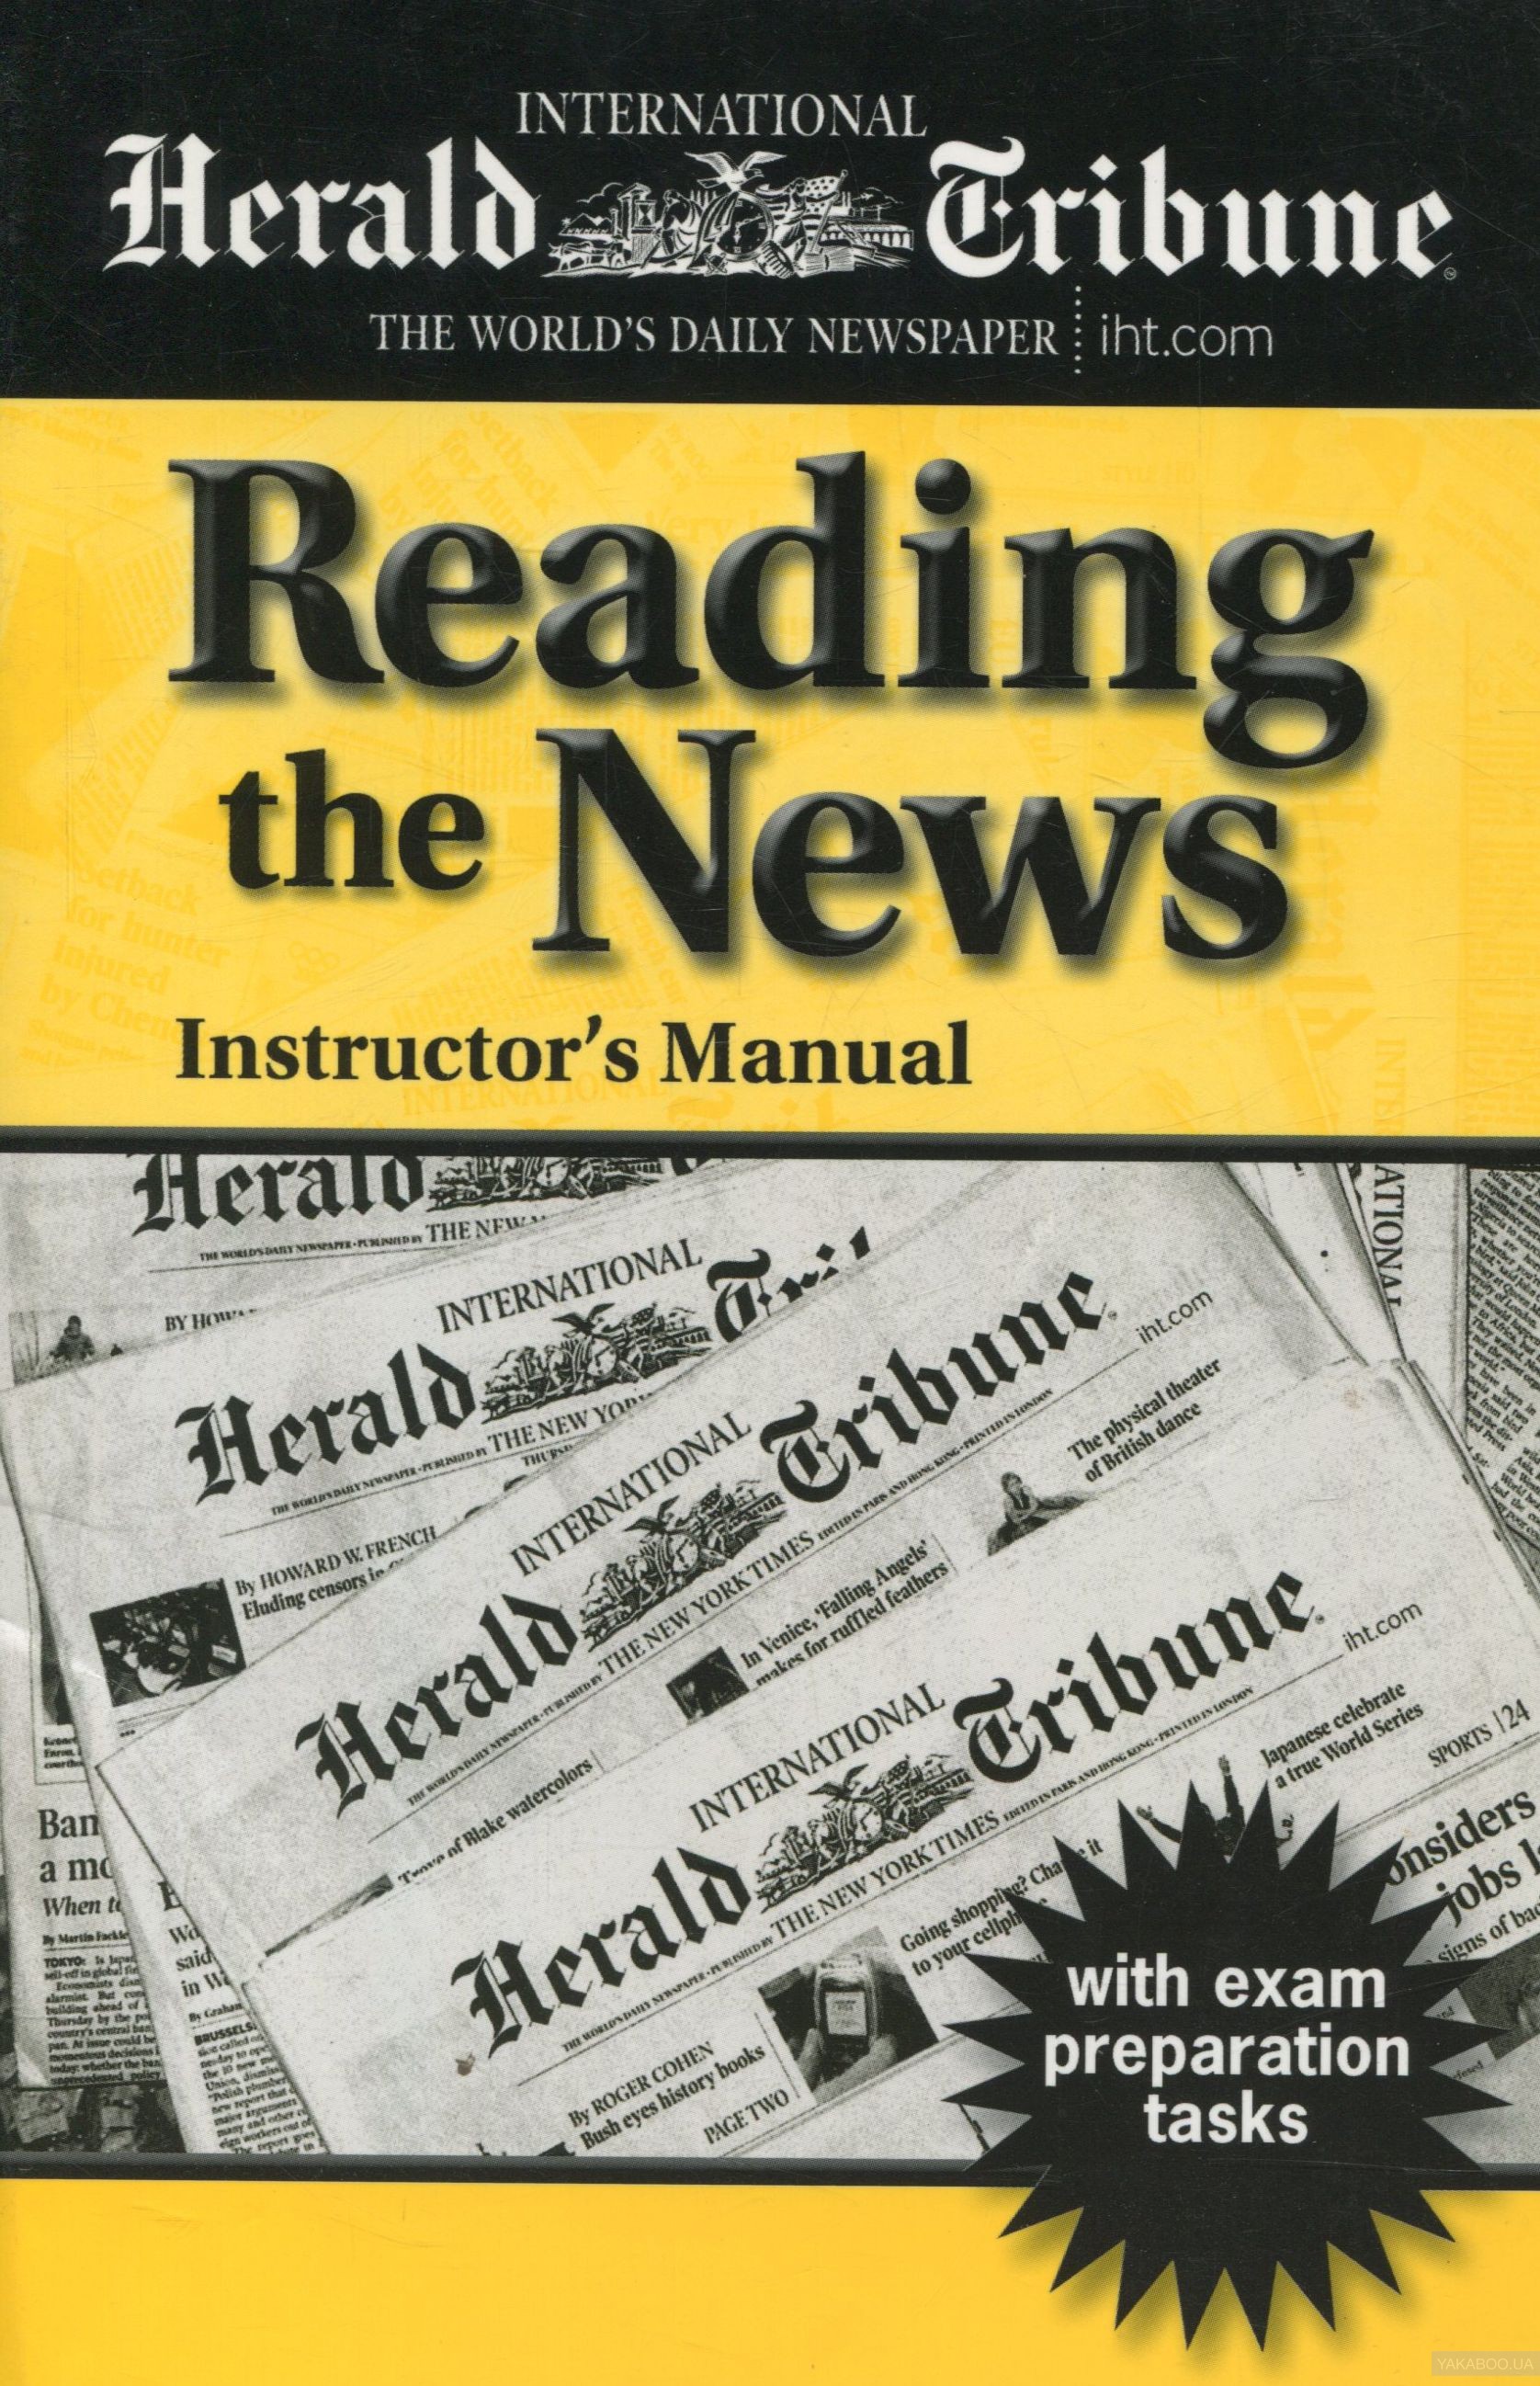 READING THE NEWS Instructor's Manual